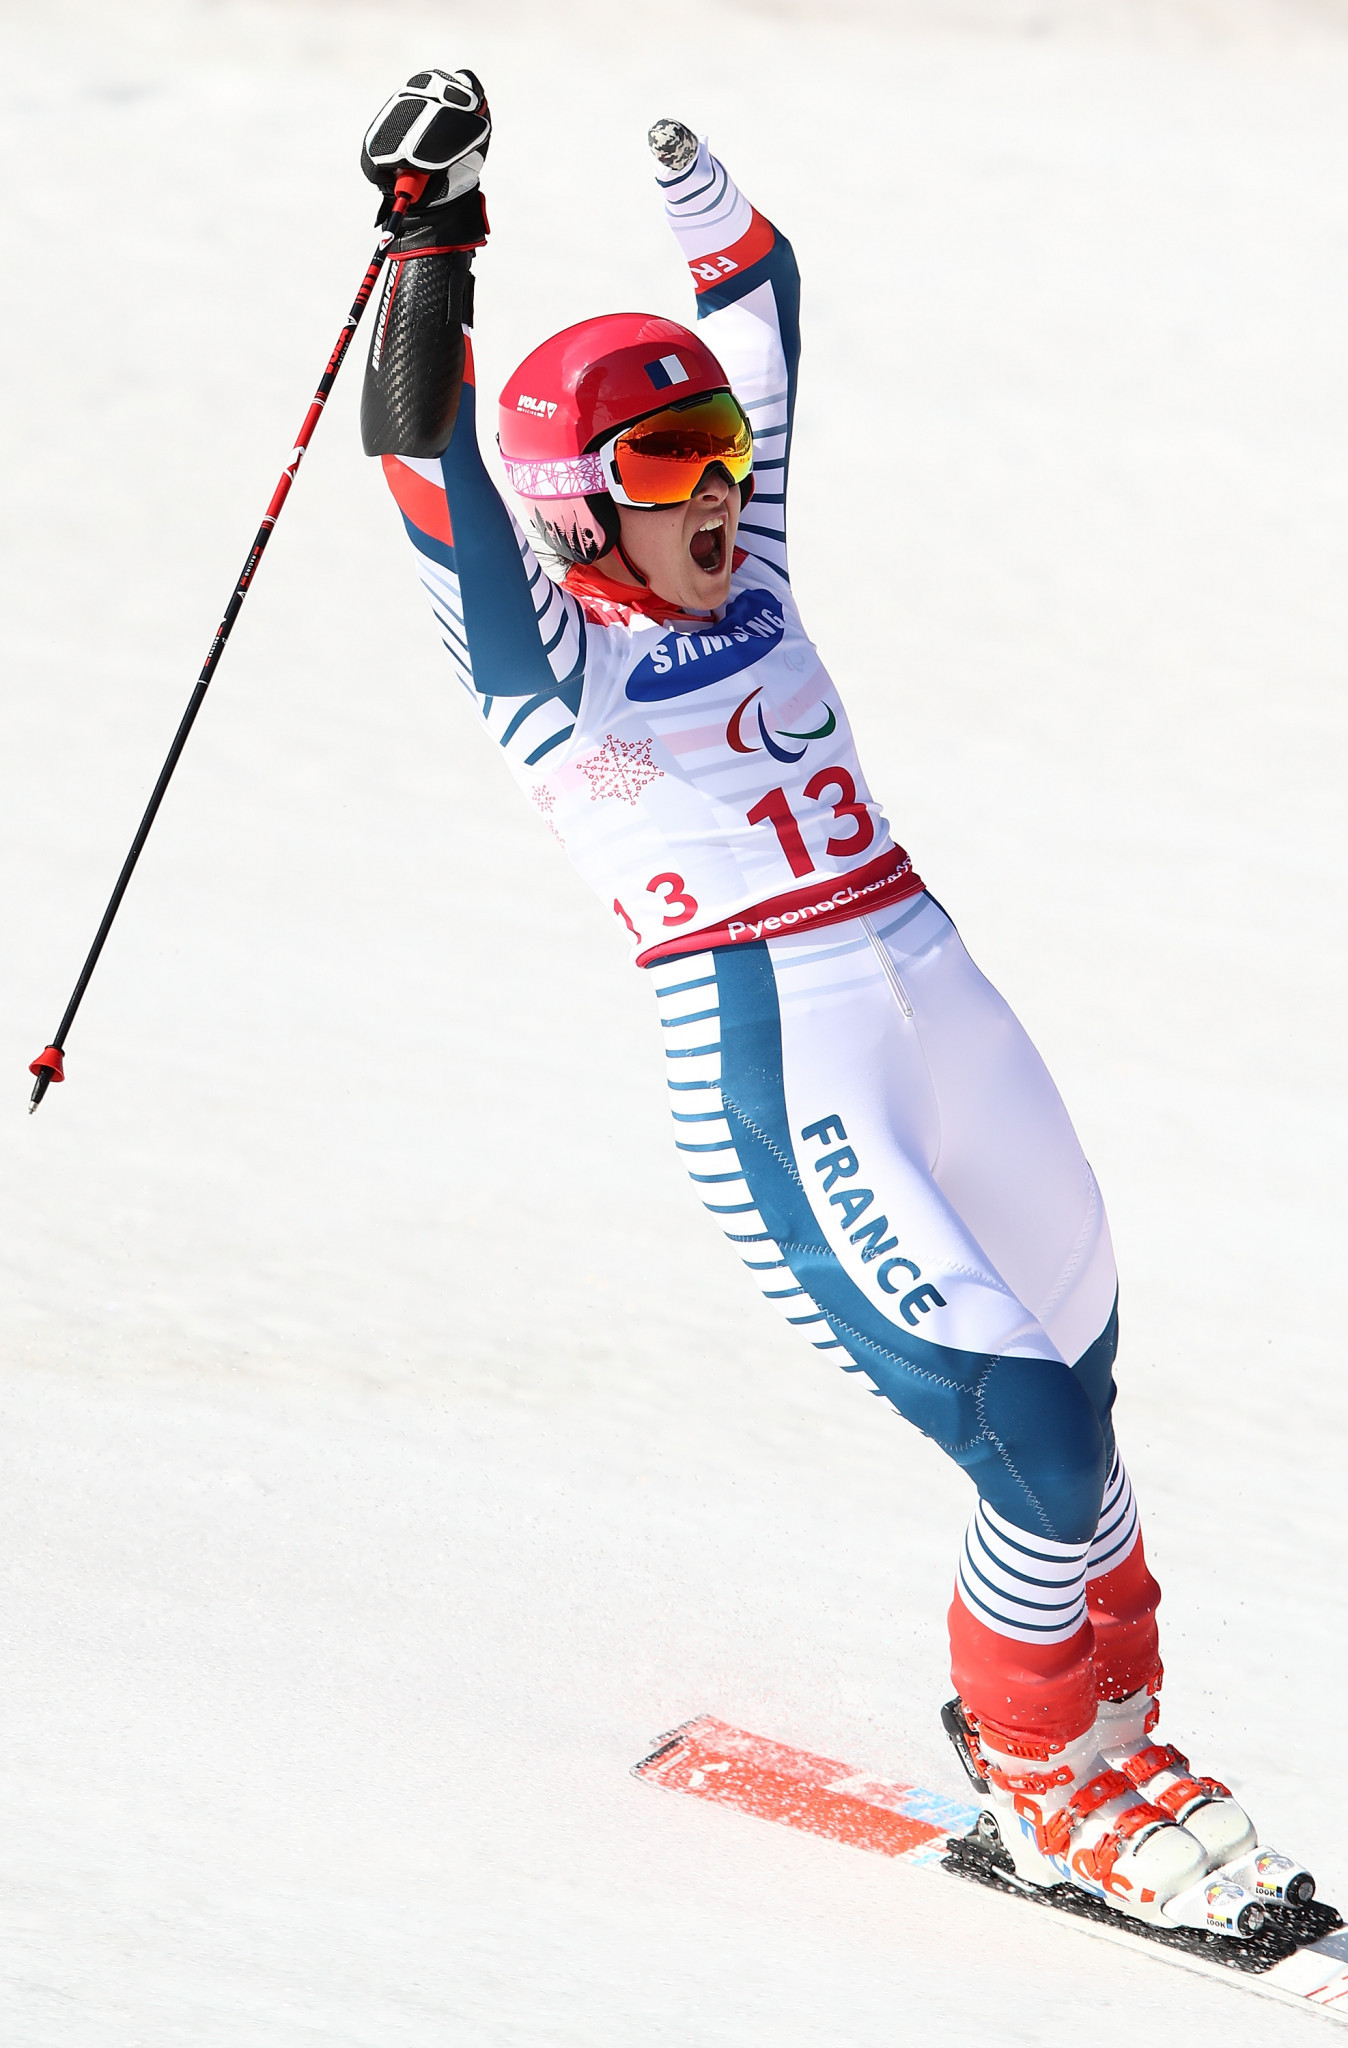 Quadruple Pyeongchang 2018 champion Marie Bochet will be in action in the women's events ©Getty Images